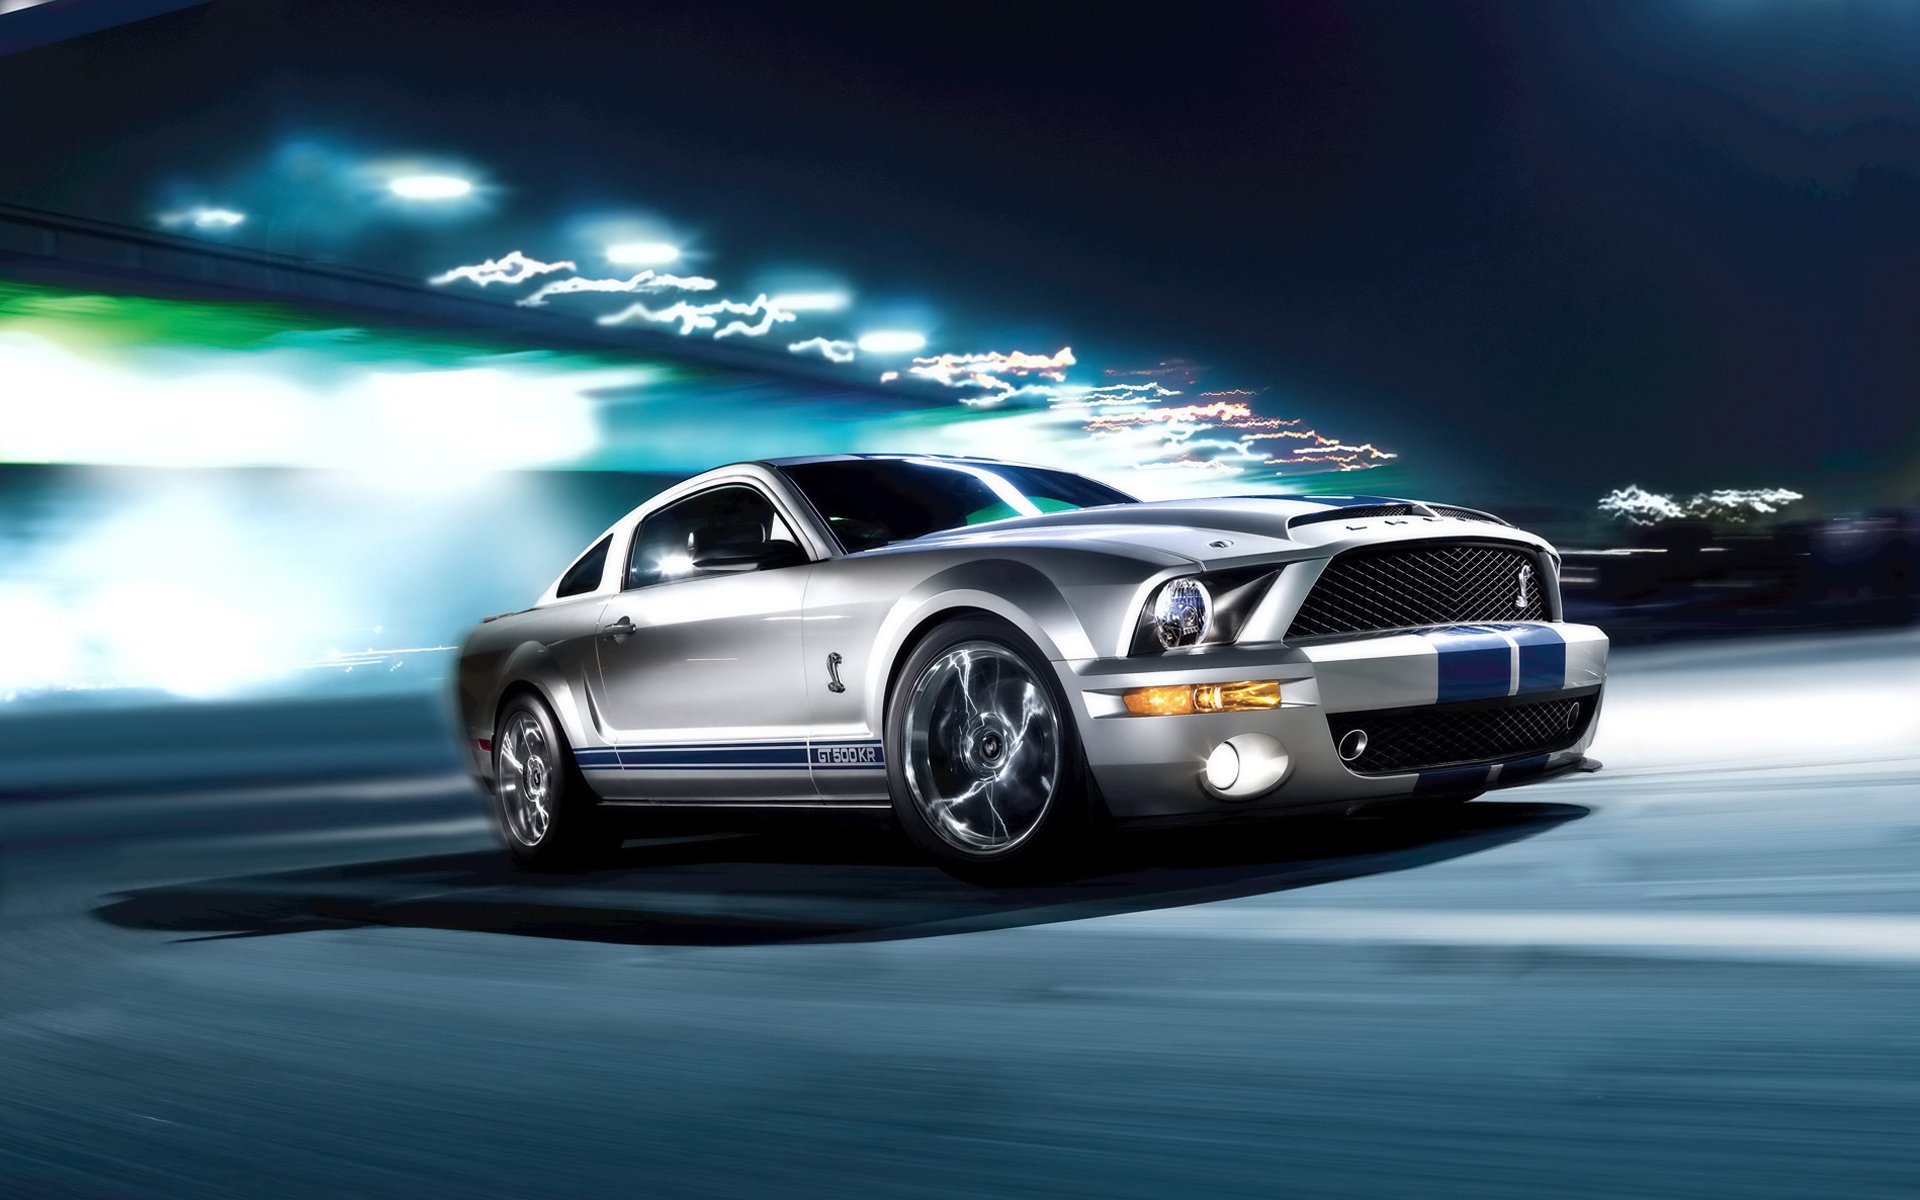 Ford Mustang Shelby Wallpapers HD Wallpapers 1920x1200